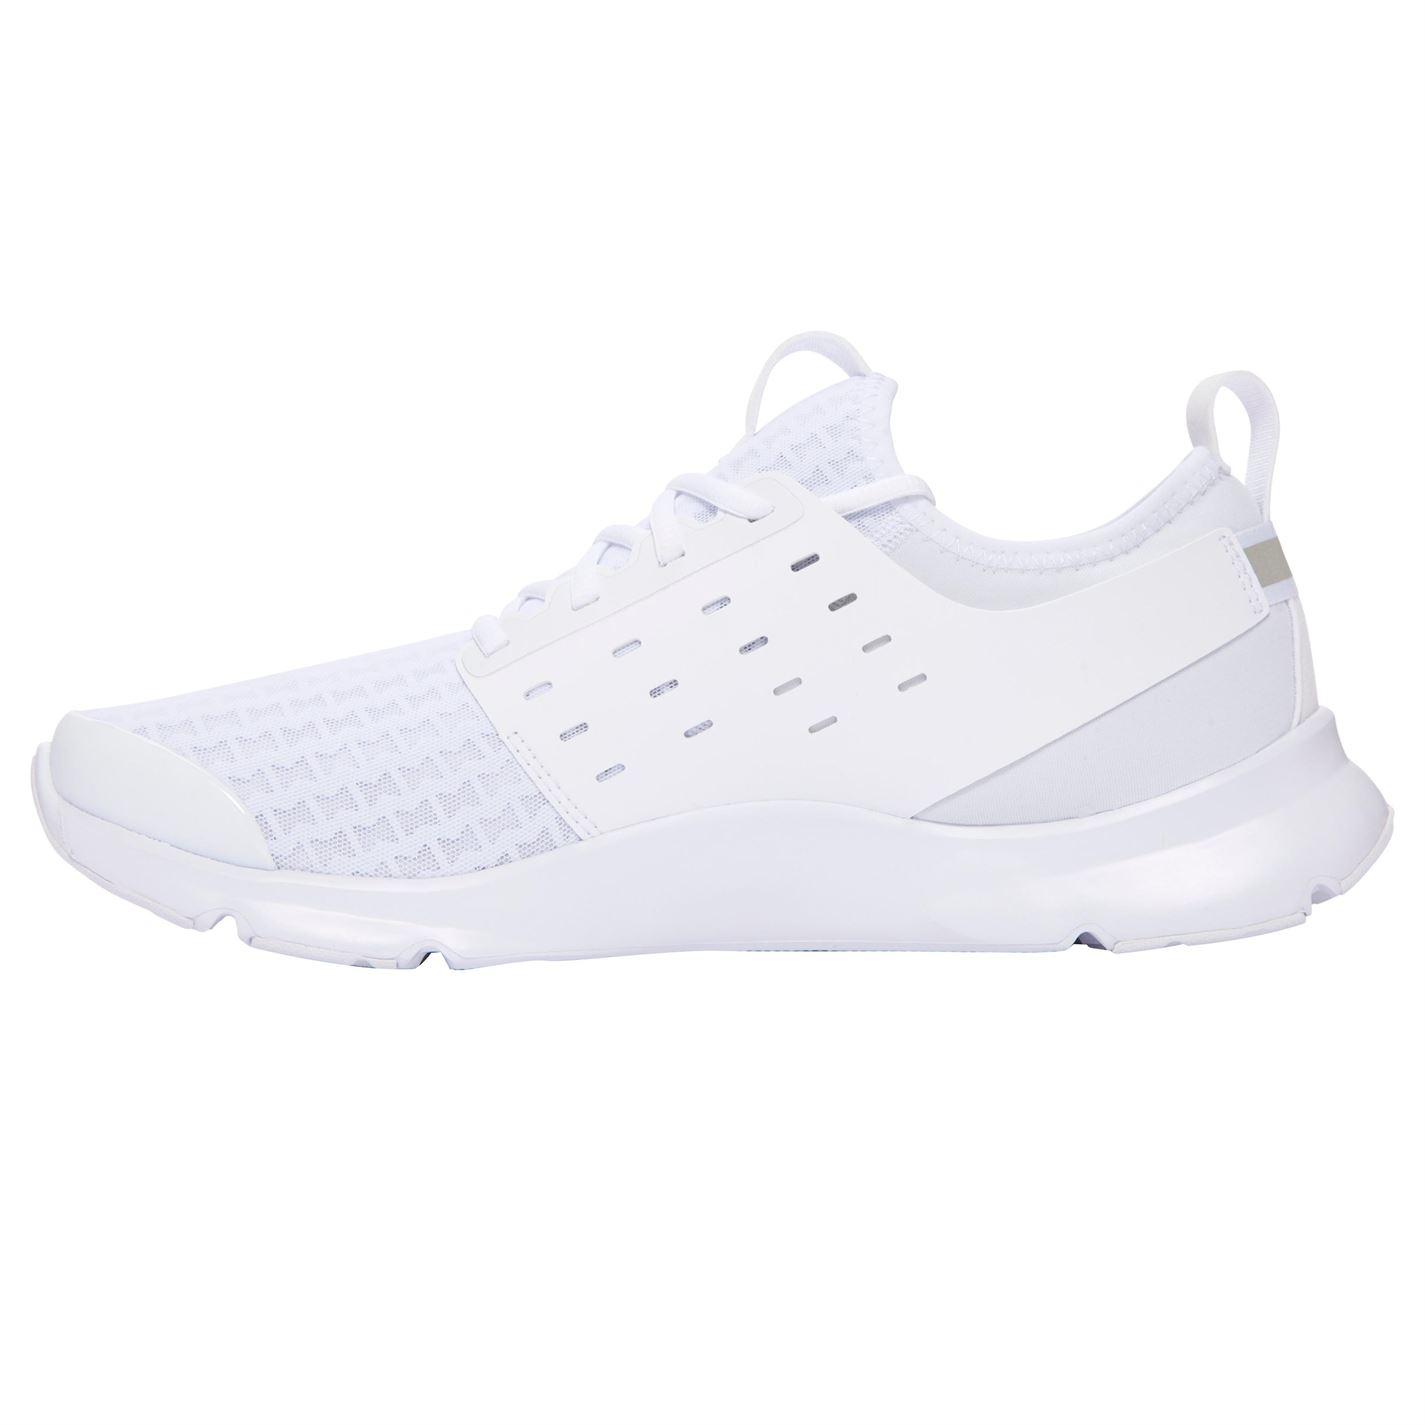 mens white under armour trainers off 58 